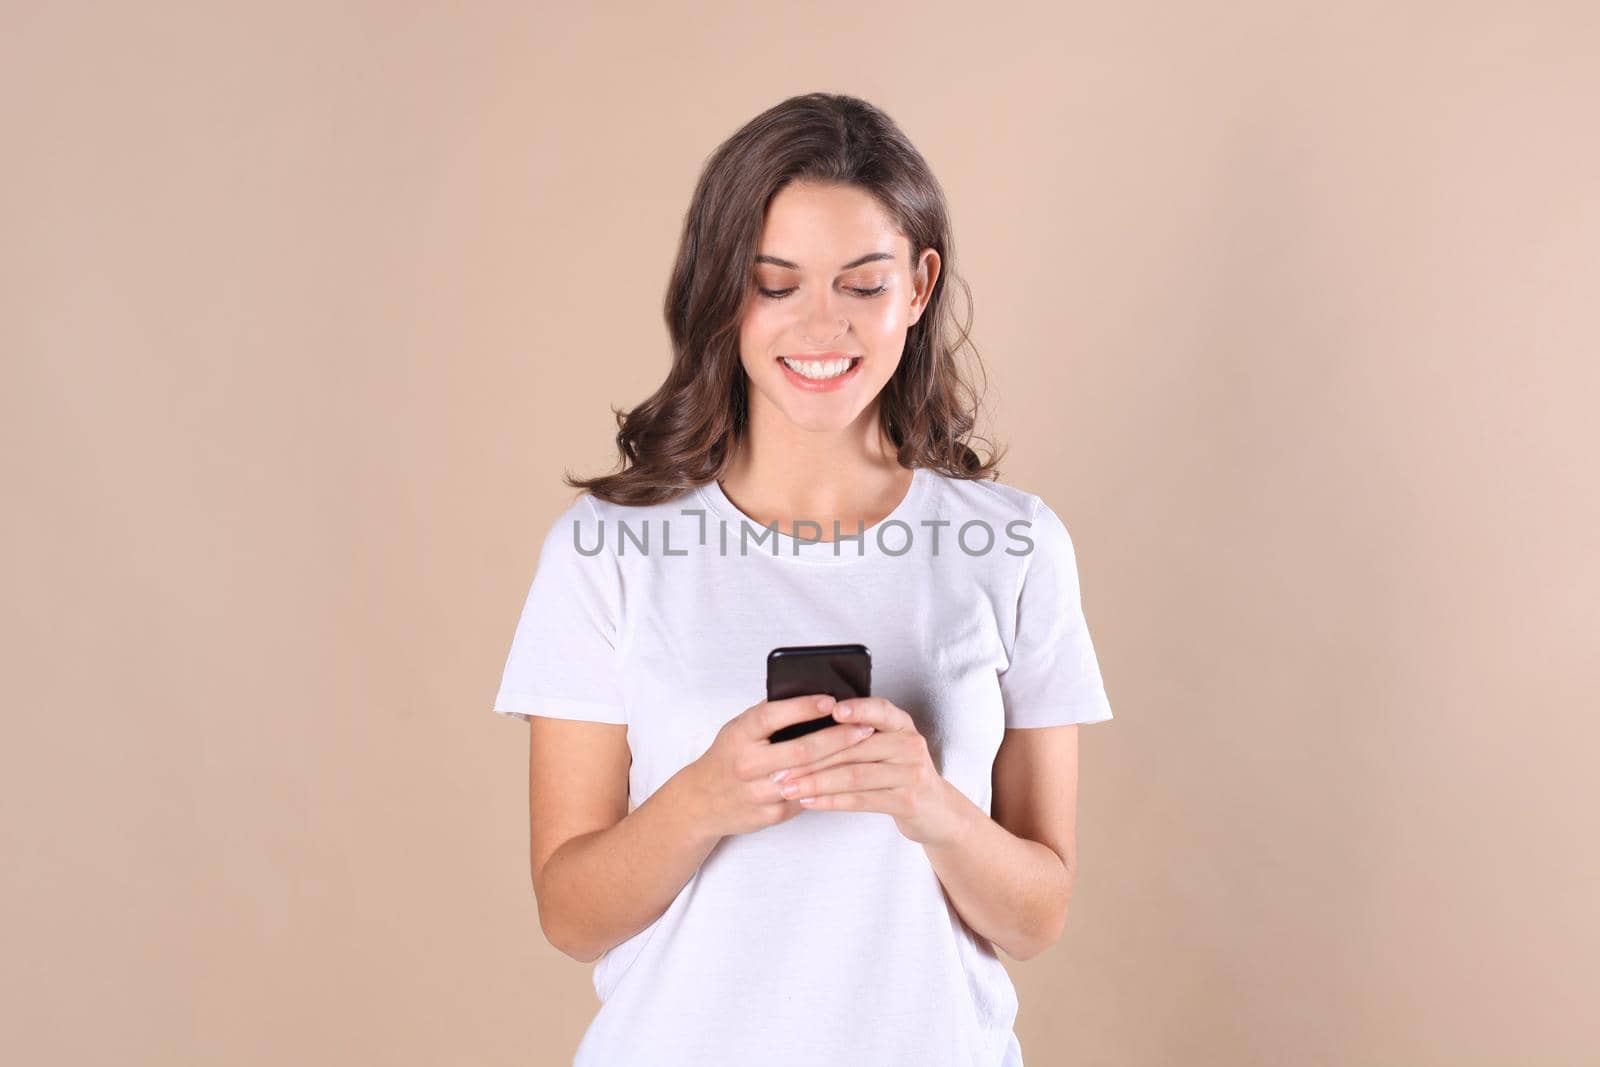 Young woman dressed in basic clothing isolated on beige background, using mobile phone